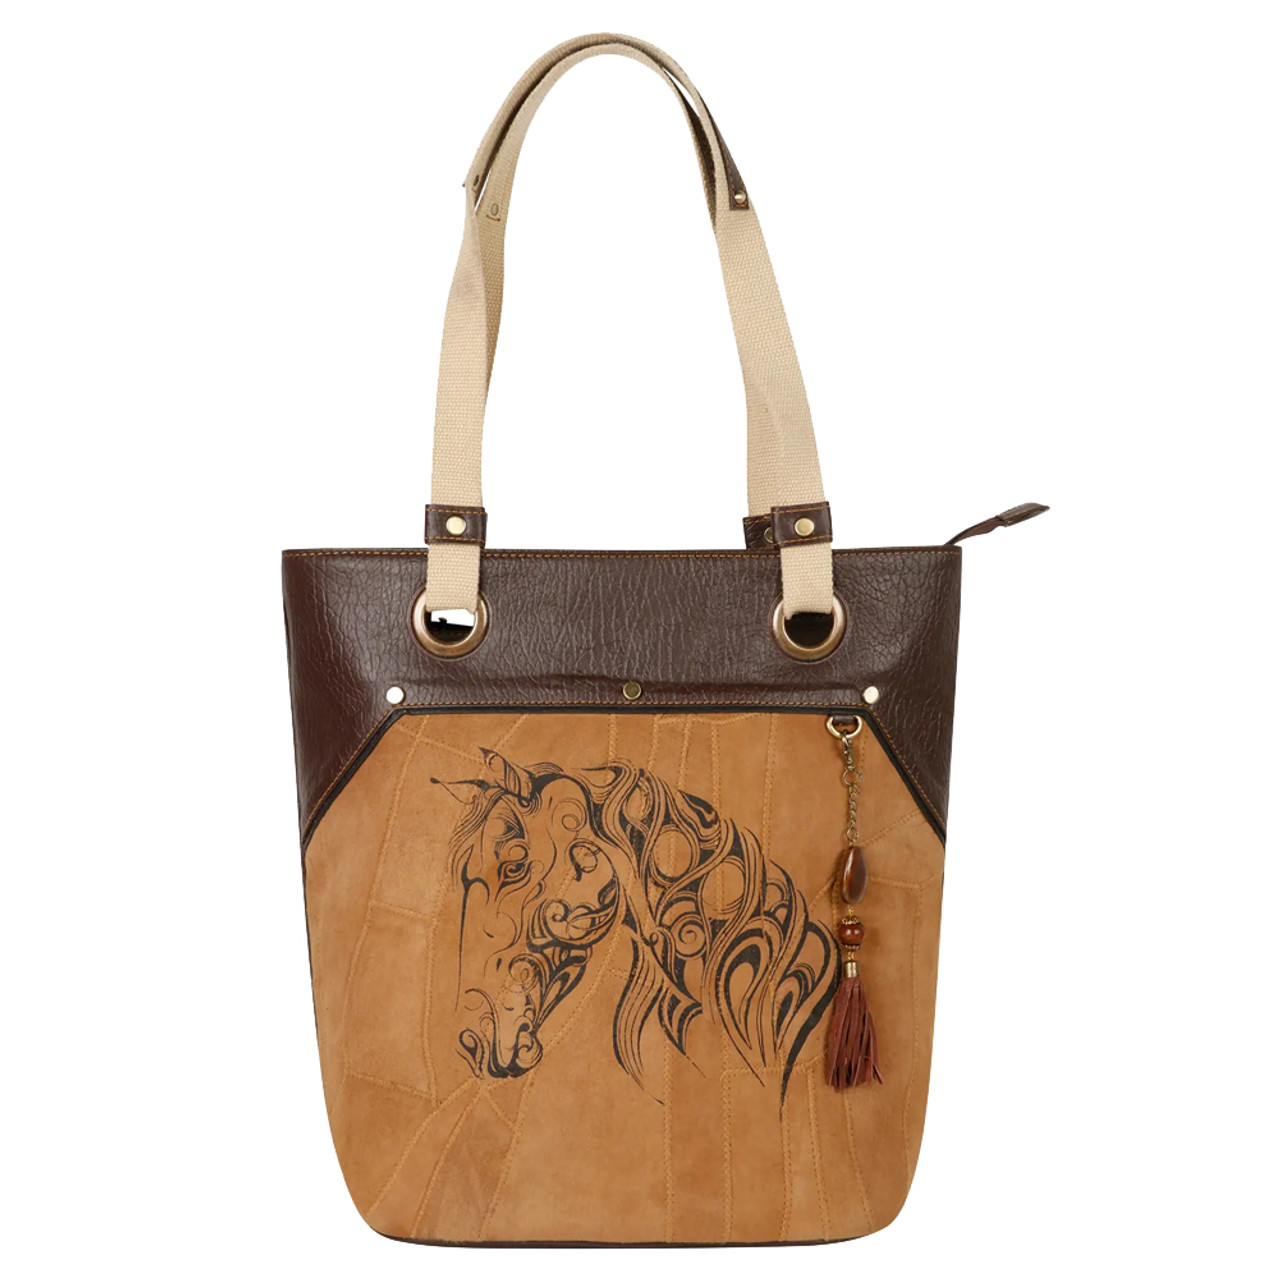 Personalized Horse Leather Handbag ,Tote Bag, Leather Tote - Inspire Uplift